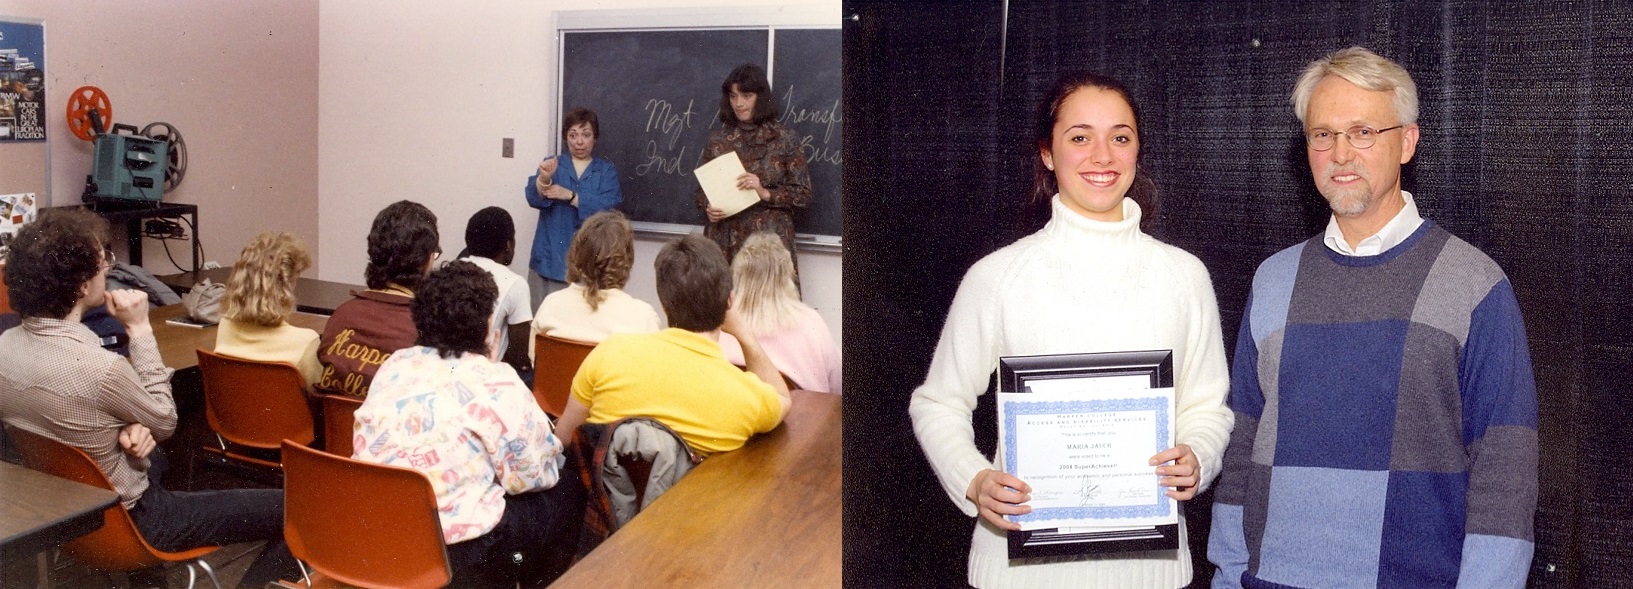 Two images show the history of the Office of Access and Disability Services, including a classroom with ASL instruction in the 1980s and former director Tom Thompson standing with a SuperAchiever! student in 2004.